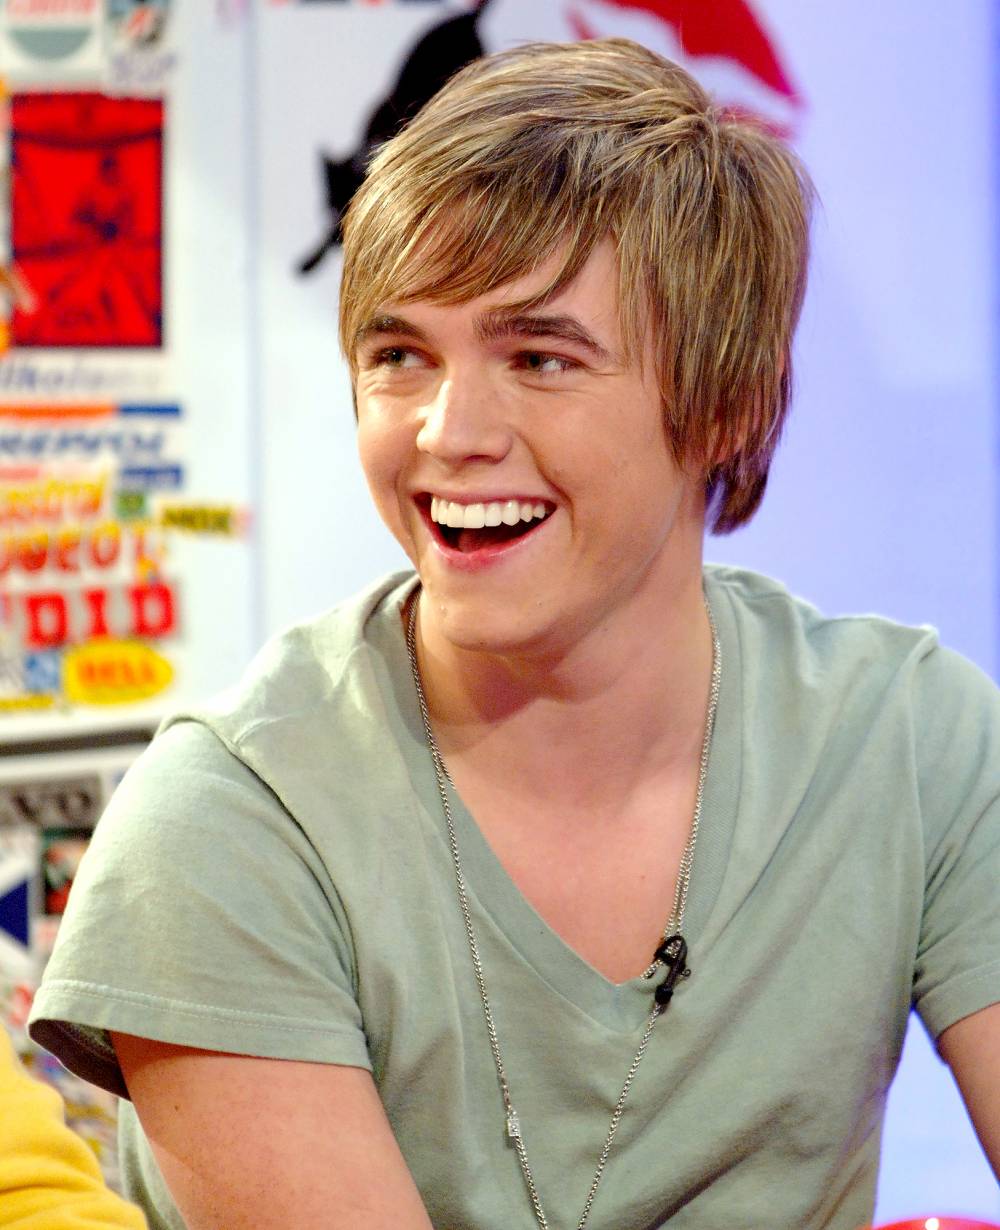 Jesse McCartney 25 Things You Don’t Know About Me 2